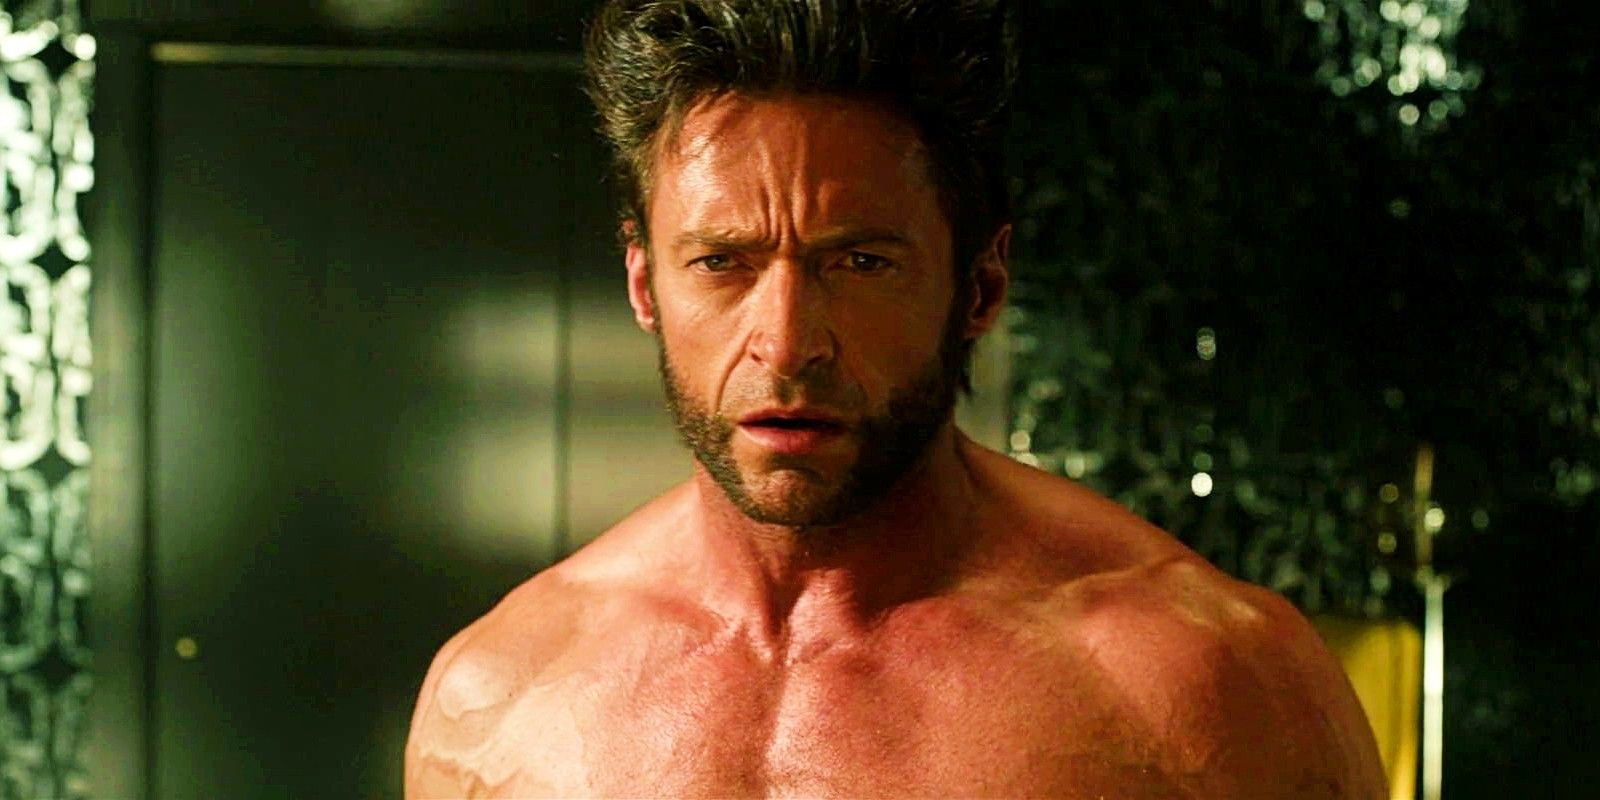 Hugh Jackman As Wolverine Looking Confused Shirtless In X-Men Days Of Future Past